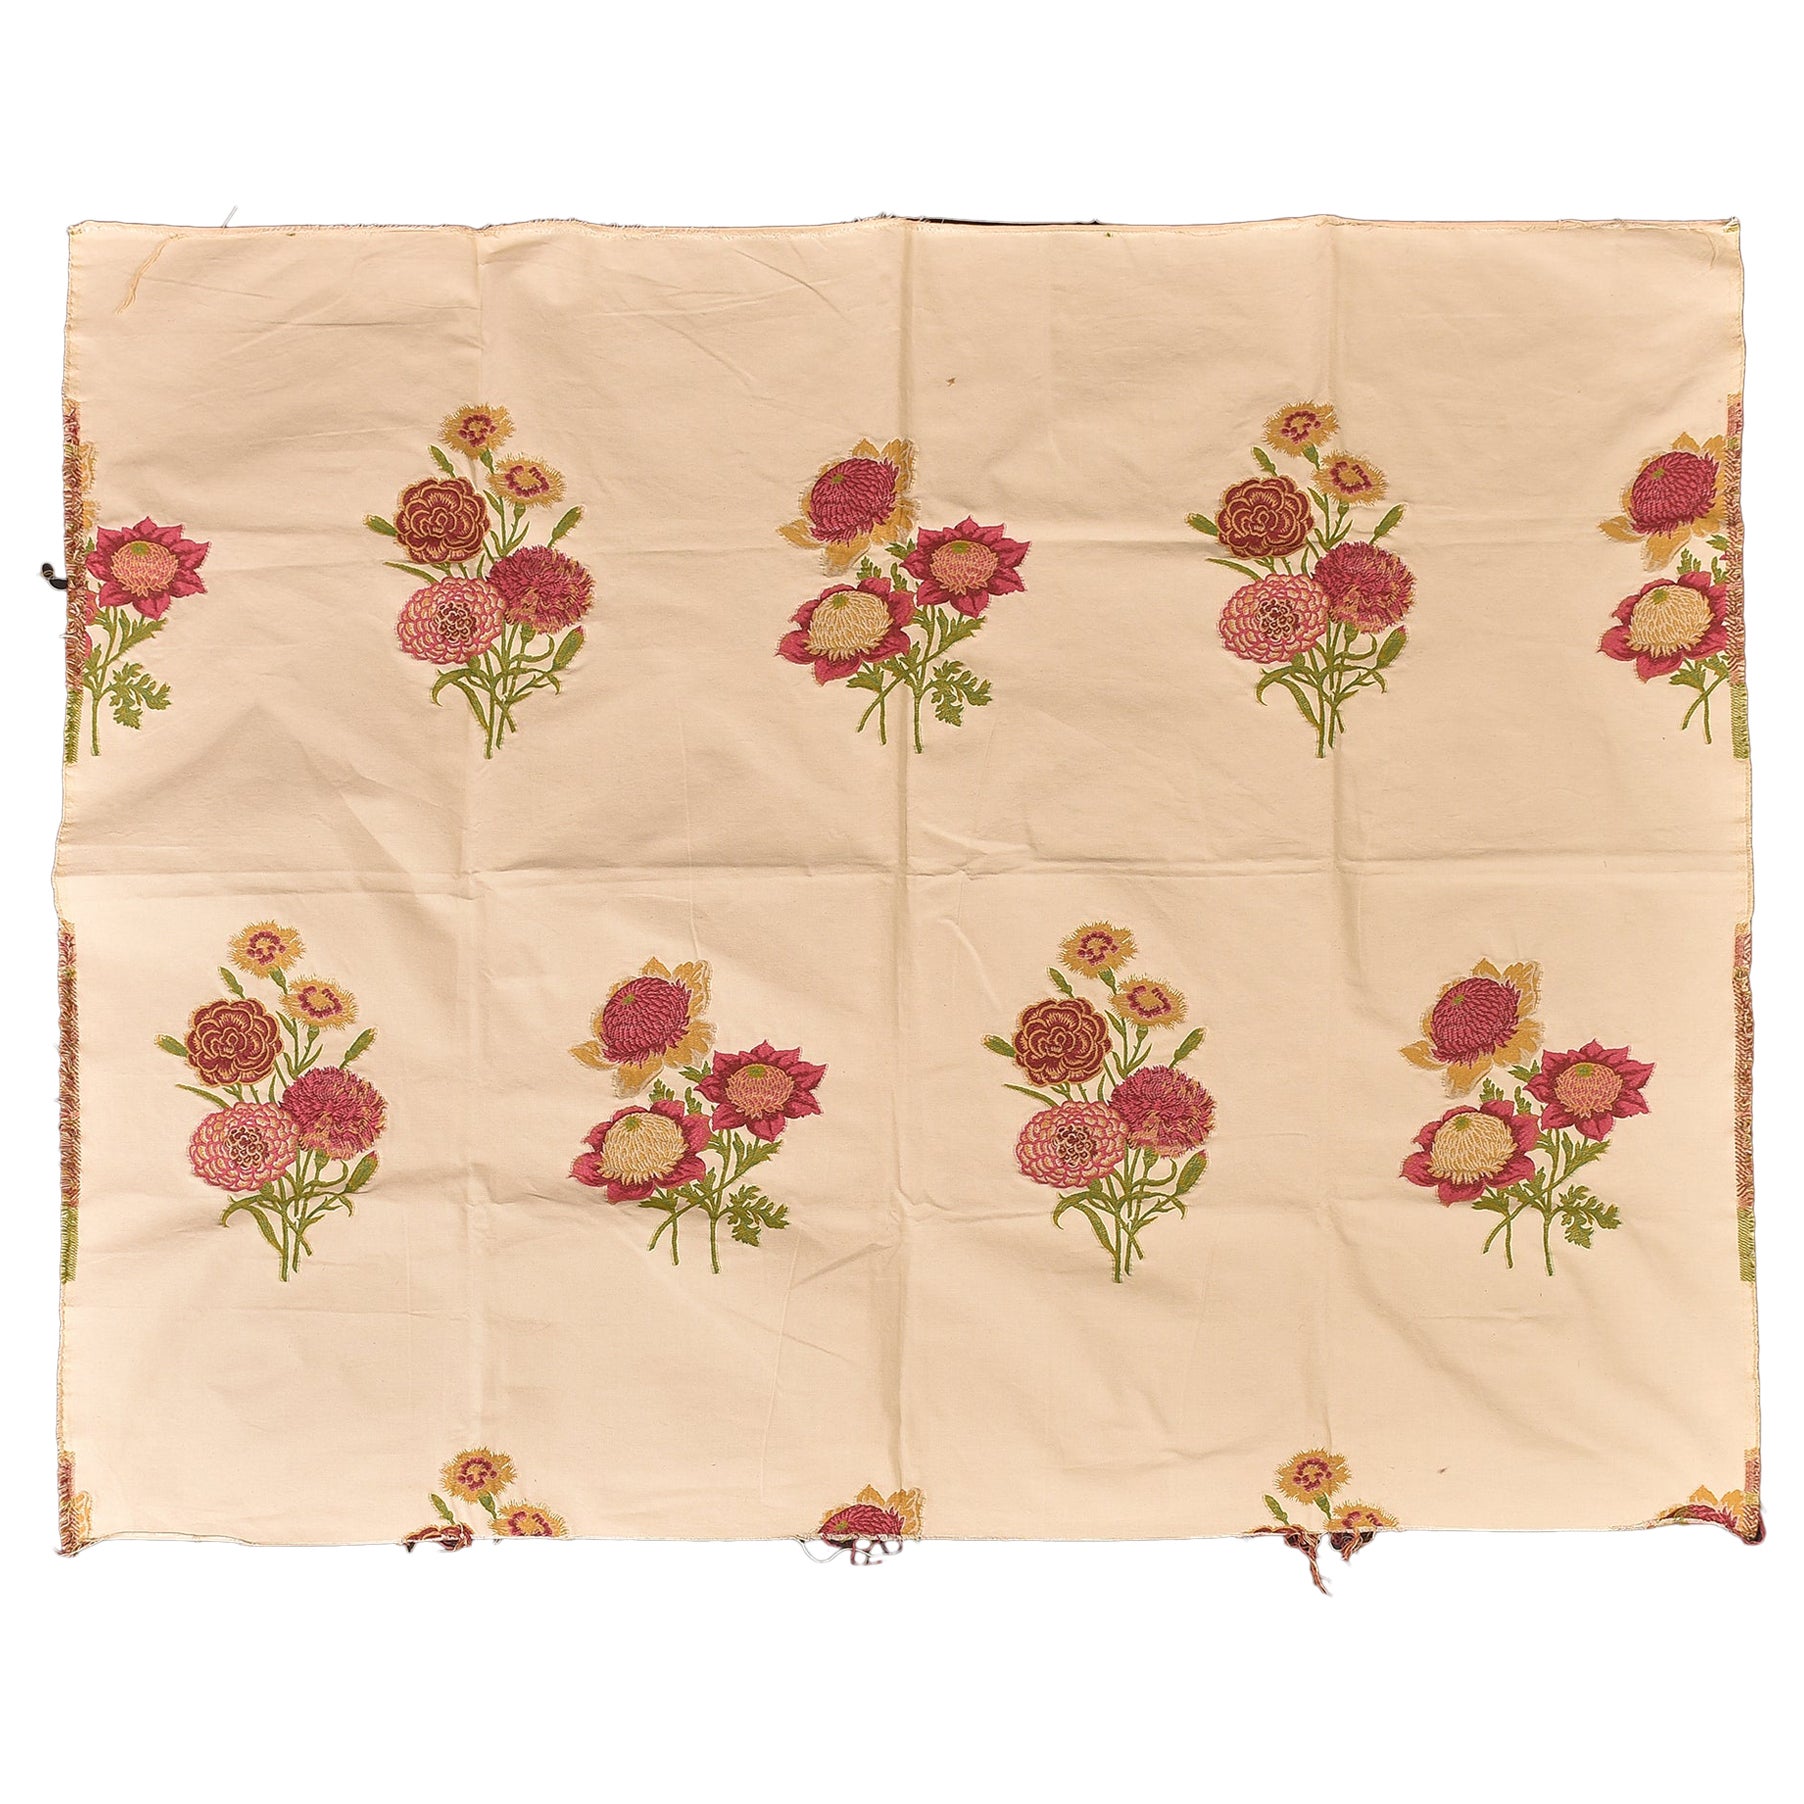 Bobbin Fabric with Flowers in Relief 